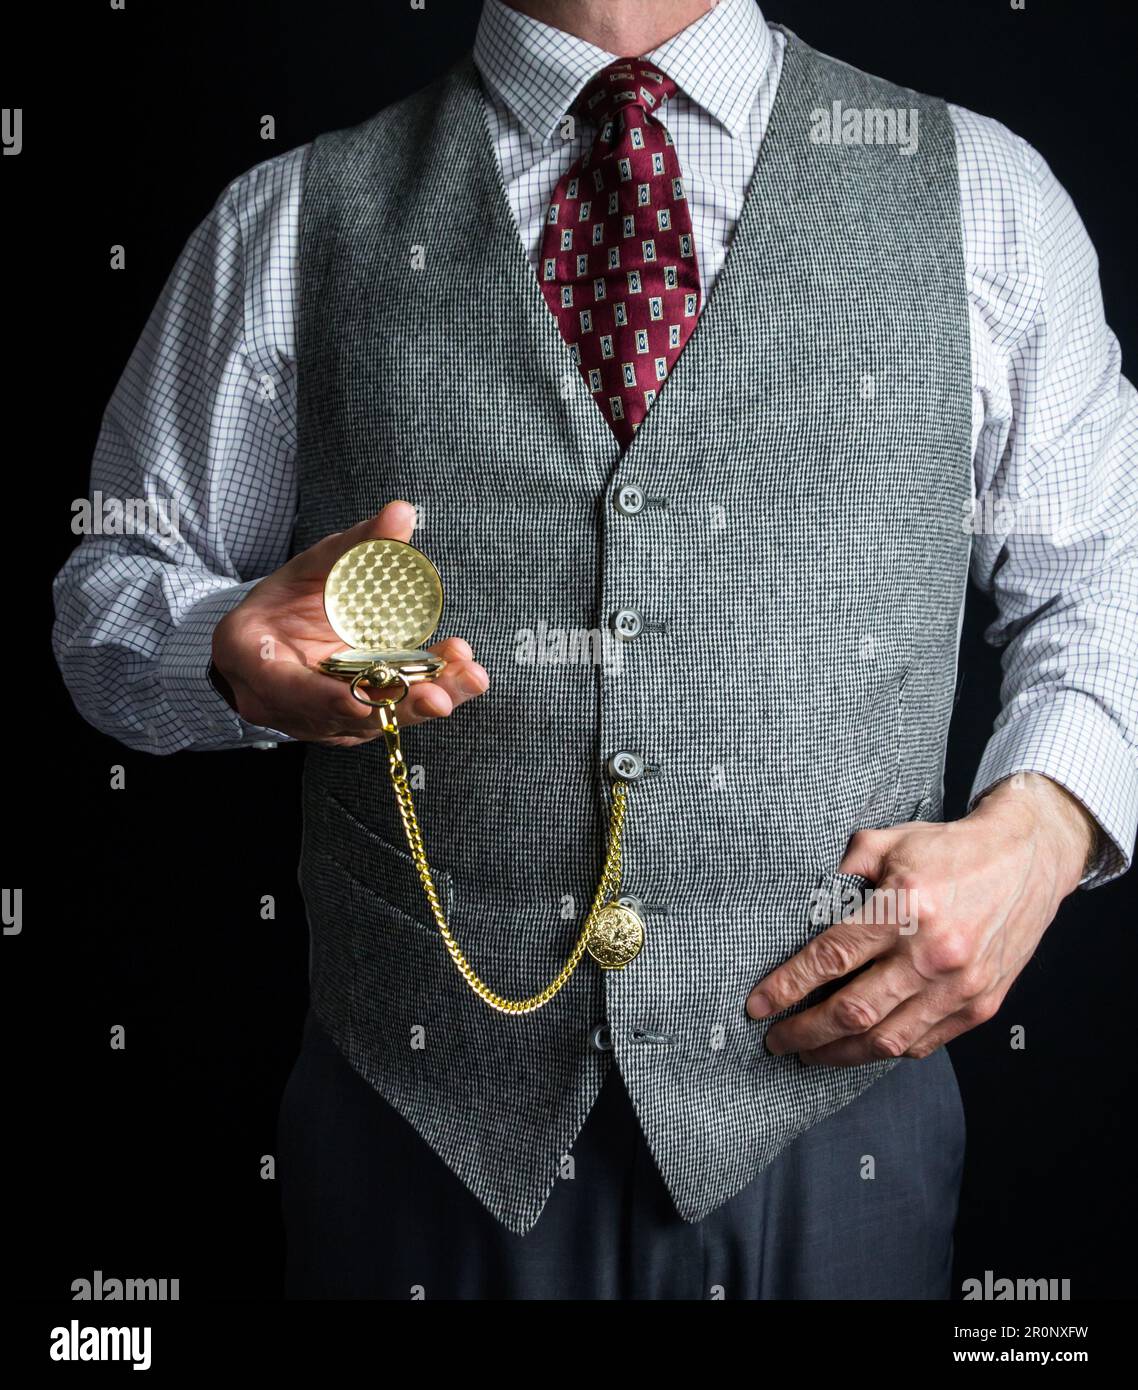 Portrait of Gentleman in Tweed Vest or Waistcoat Holding Pocket Watch.  Vintage Style and Retro Fashion of Classic English Gentleman Stock Photo -  Alamy